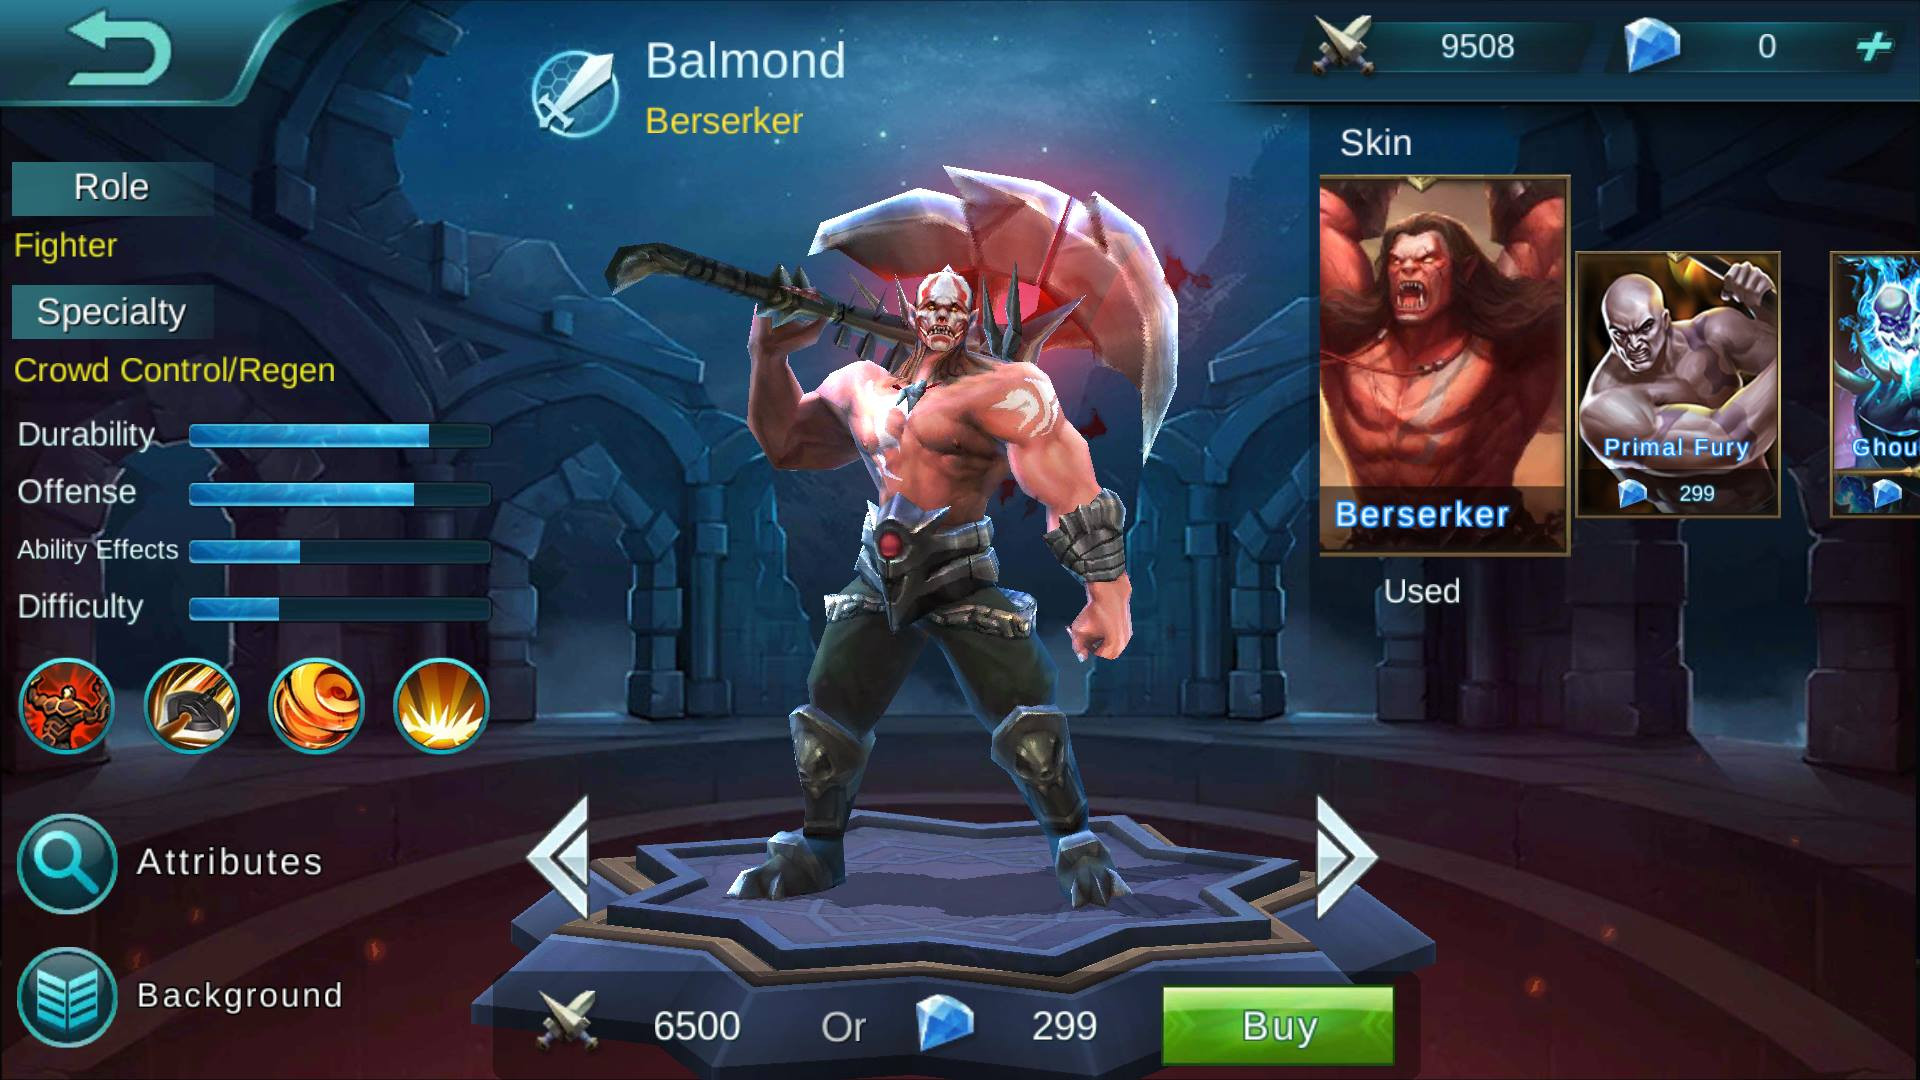 Moskov Build Guide And Skills In Mobile Legends